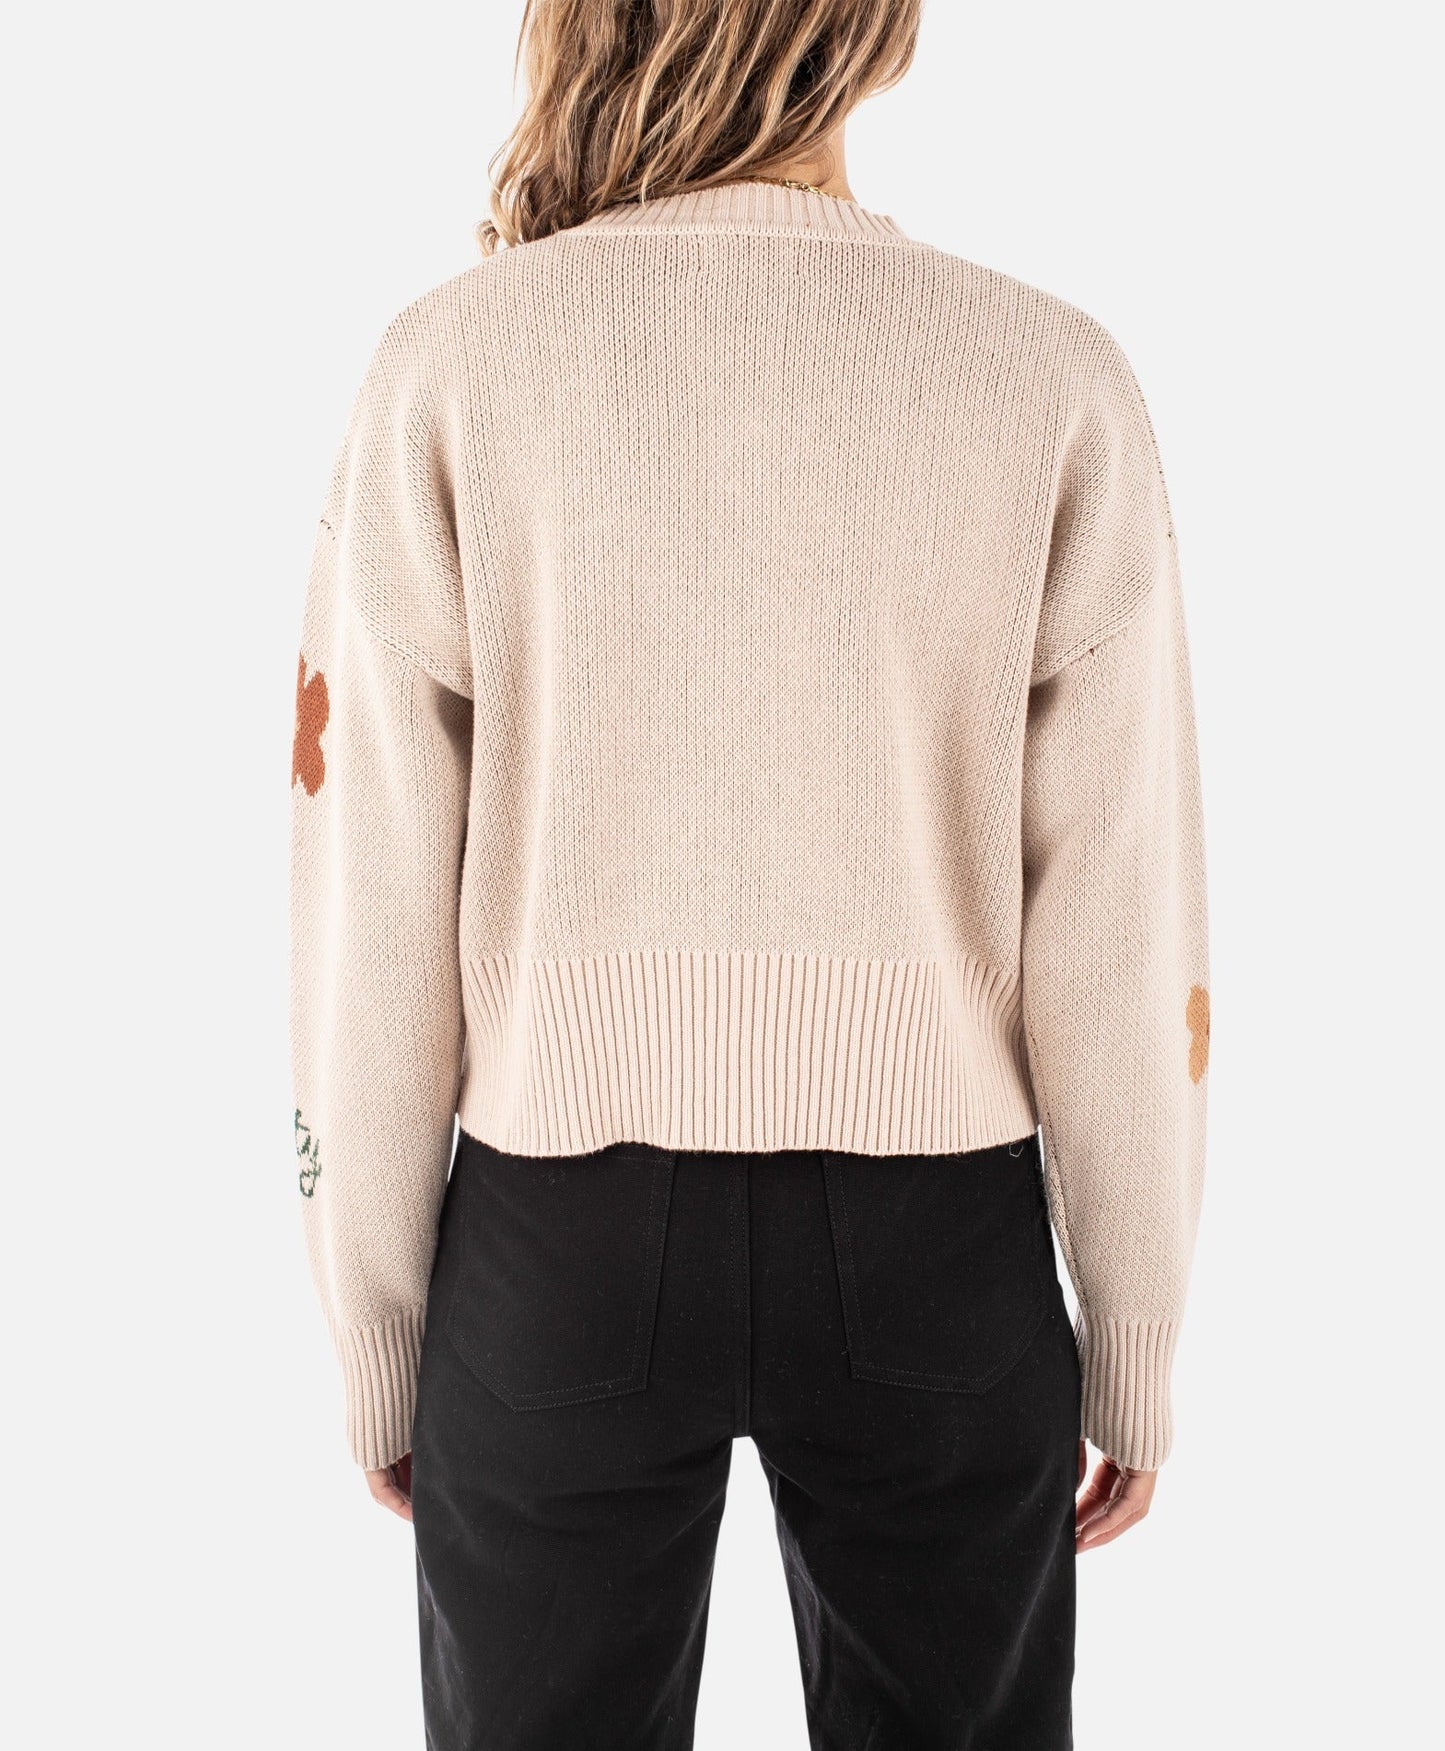 Crescent Jacquard Sweater - Storm and Sky Shoppe - Jetty